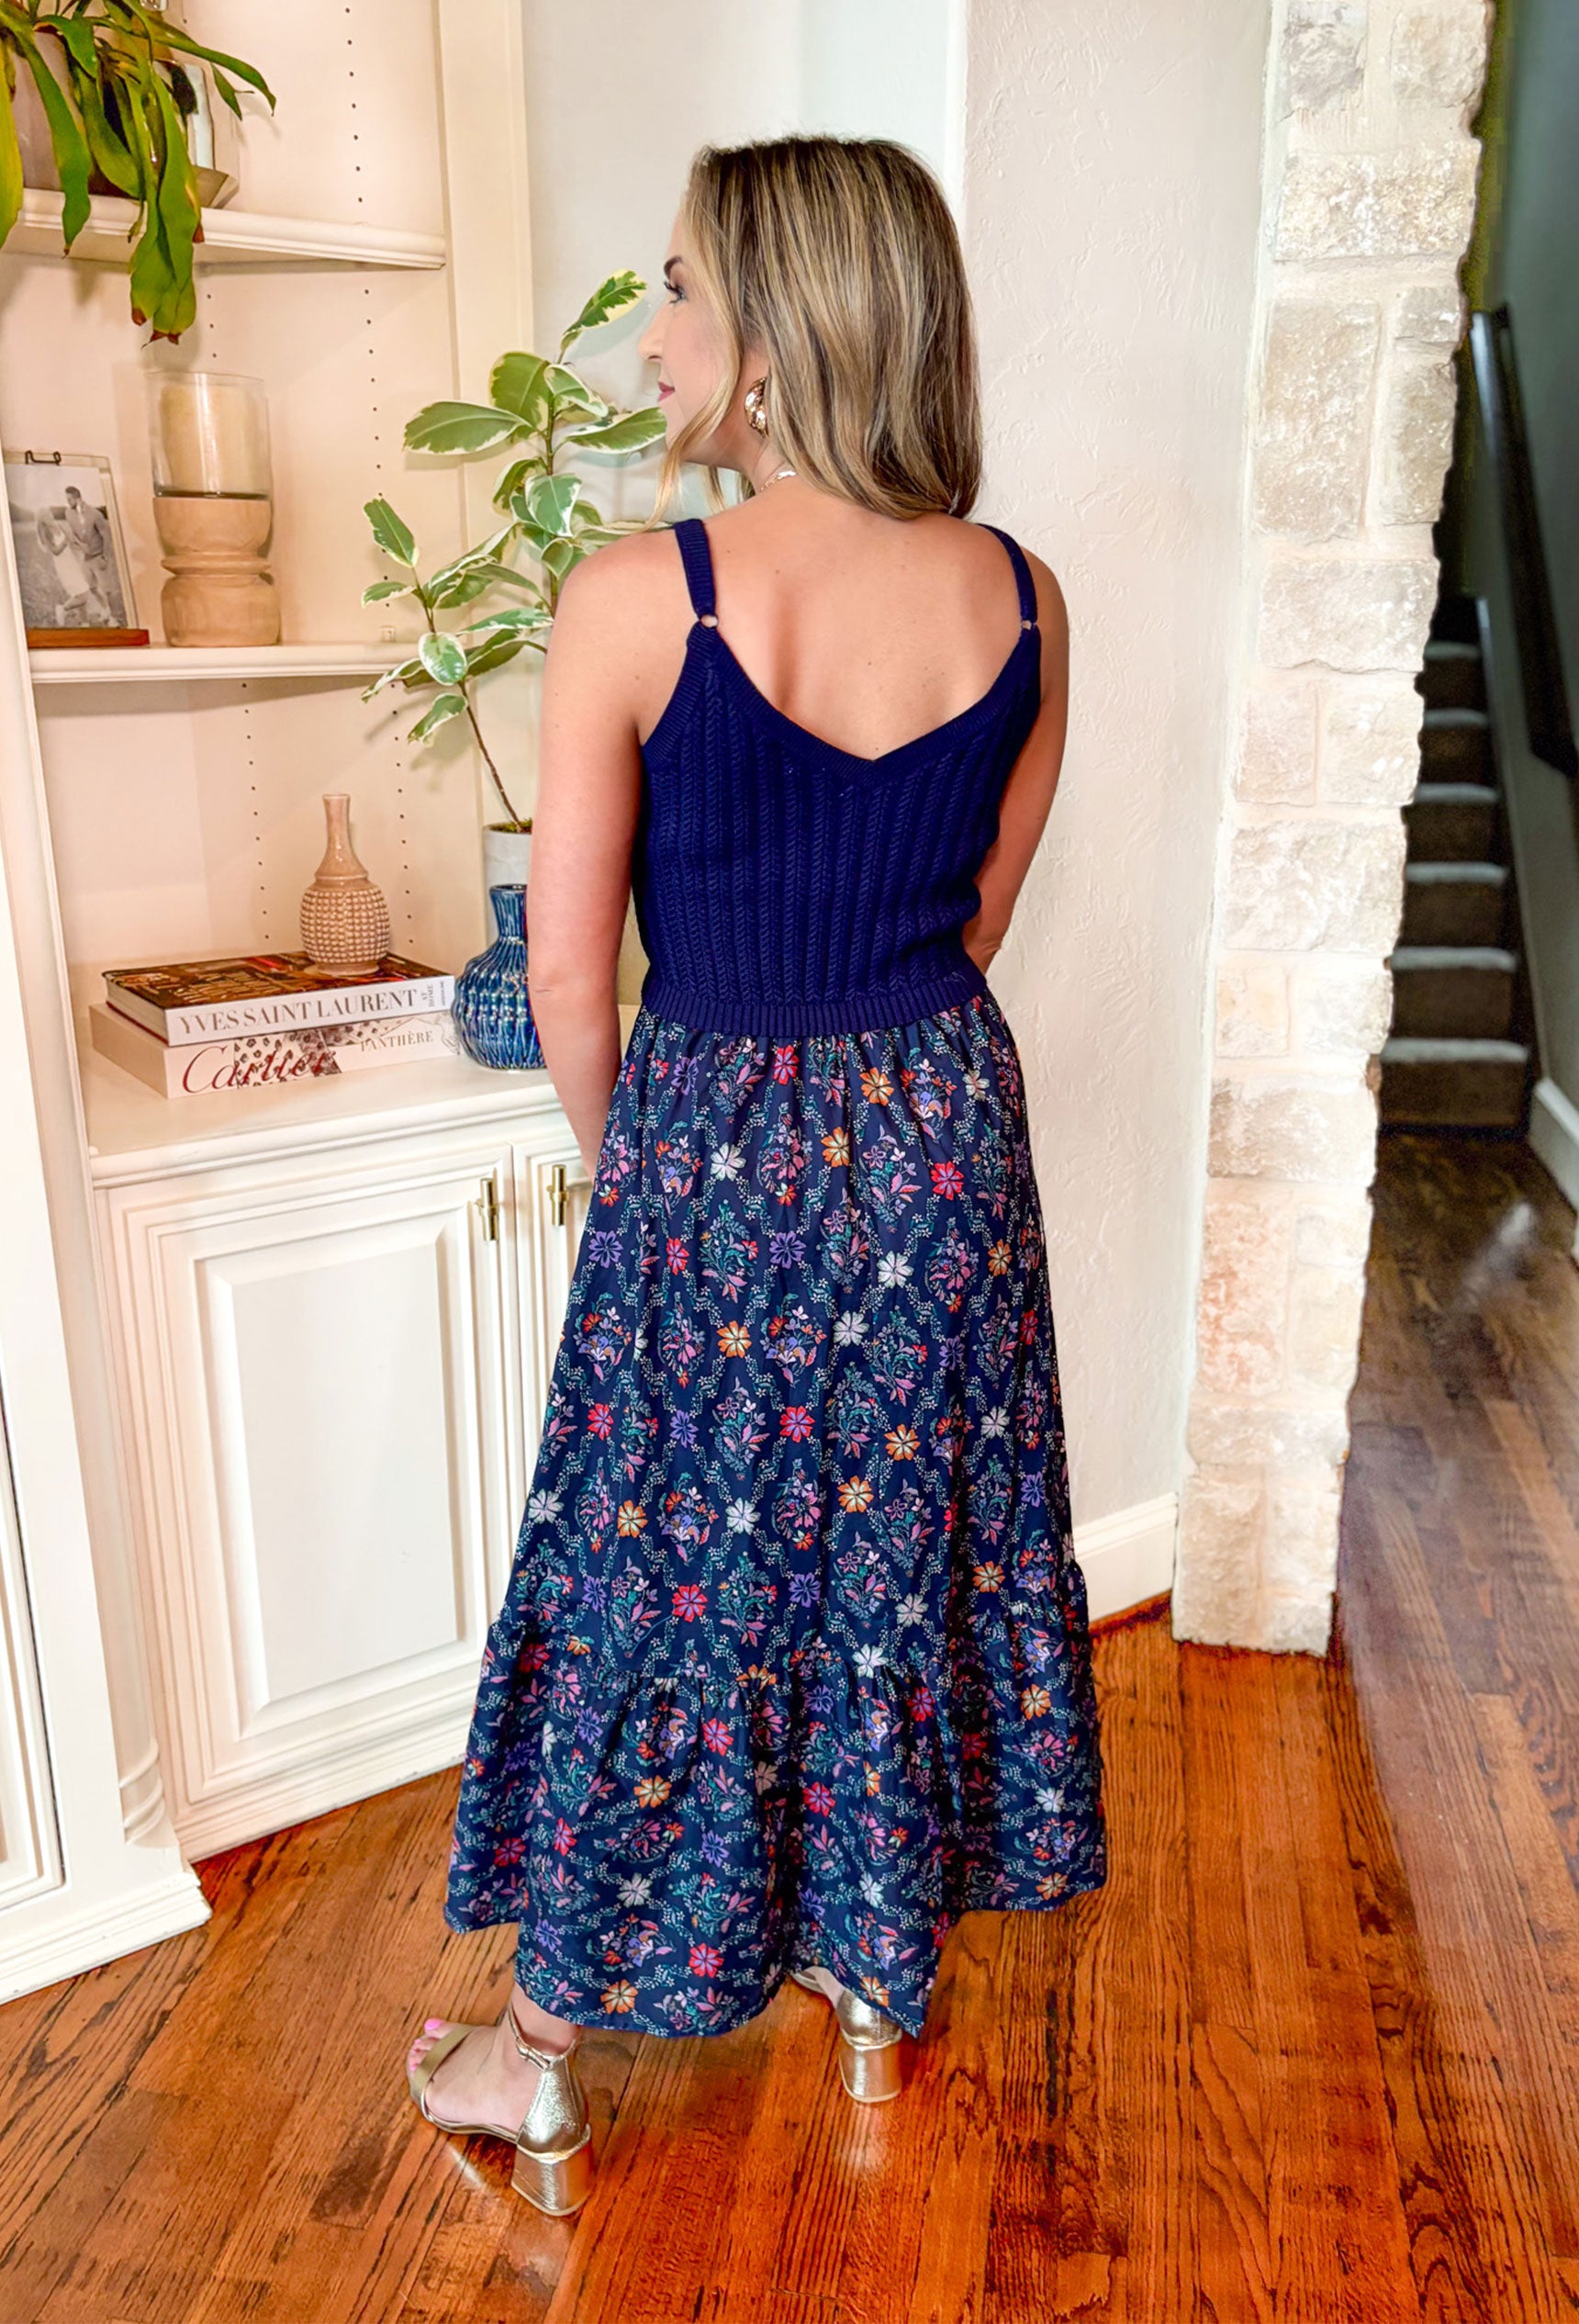 Can't Compare Floral Midi Dress, spaghetti strap midi dress with a navy sweater tank on the top half of the dress and flowy navy with floral print on the bottom of the dress, dress has pockets